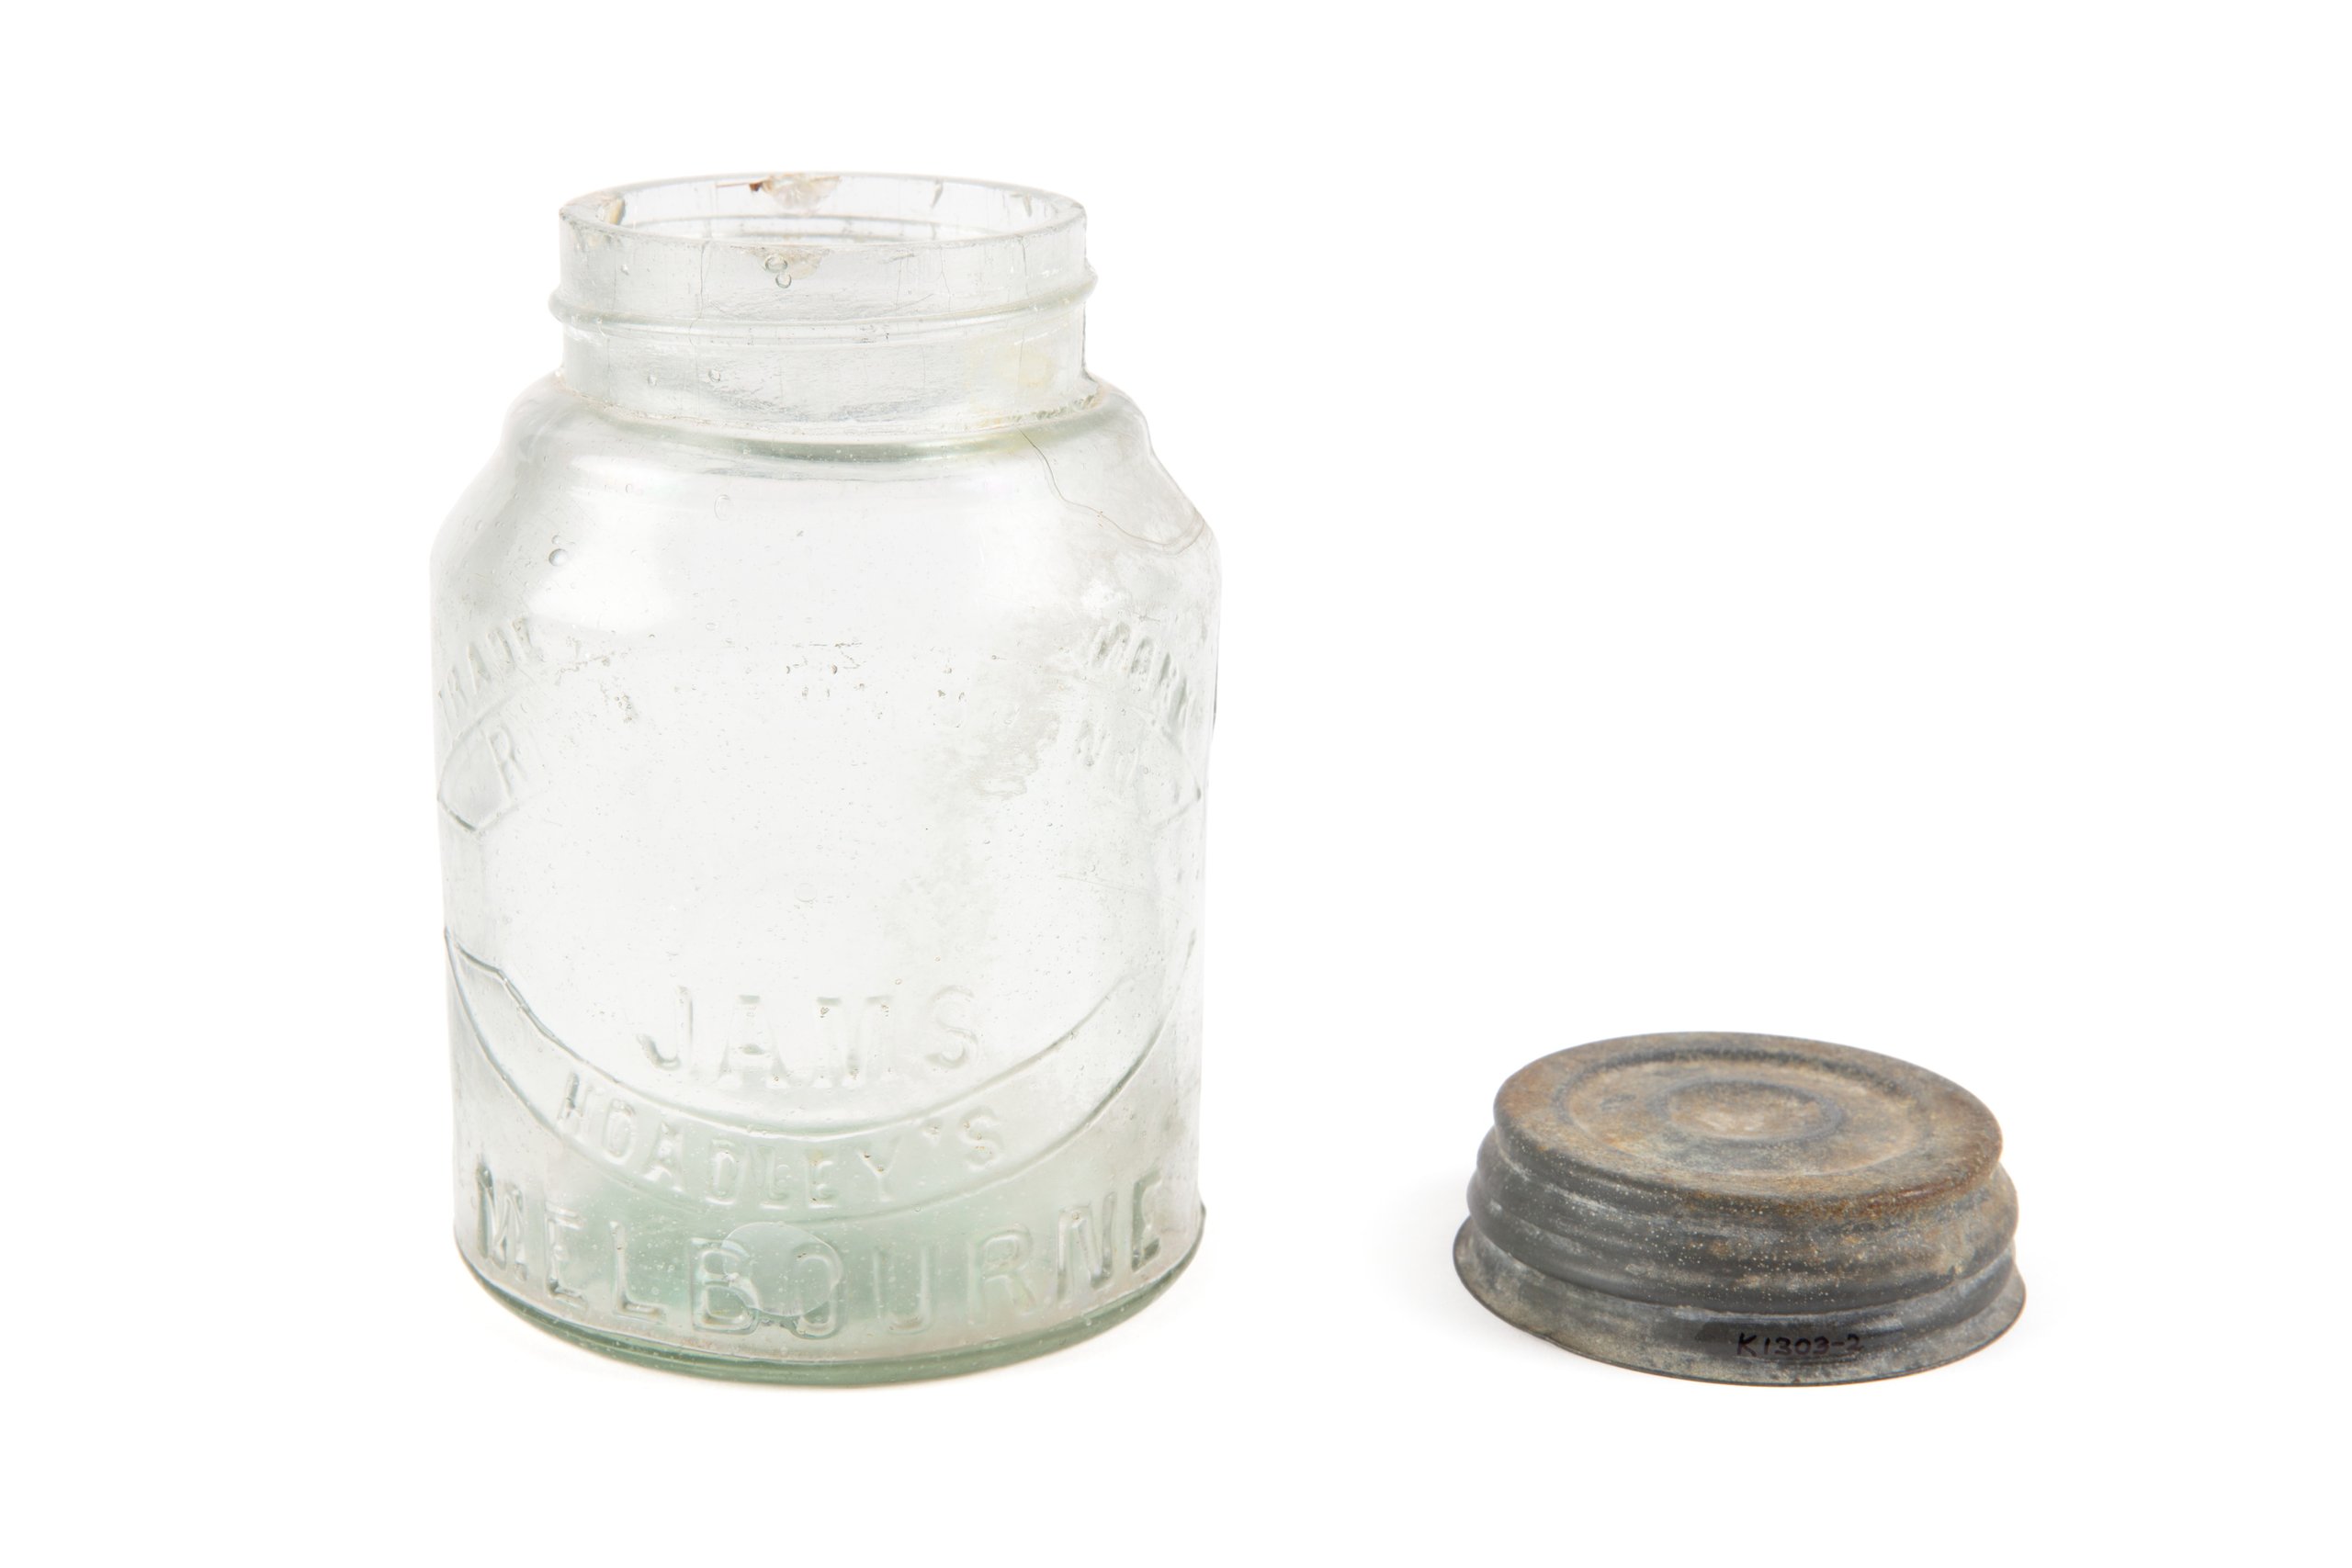 'Rising Sun Brand' jam jar and lid made by A Hoadley & Co